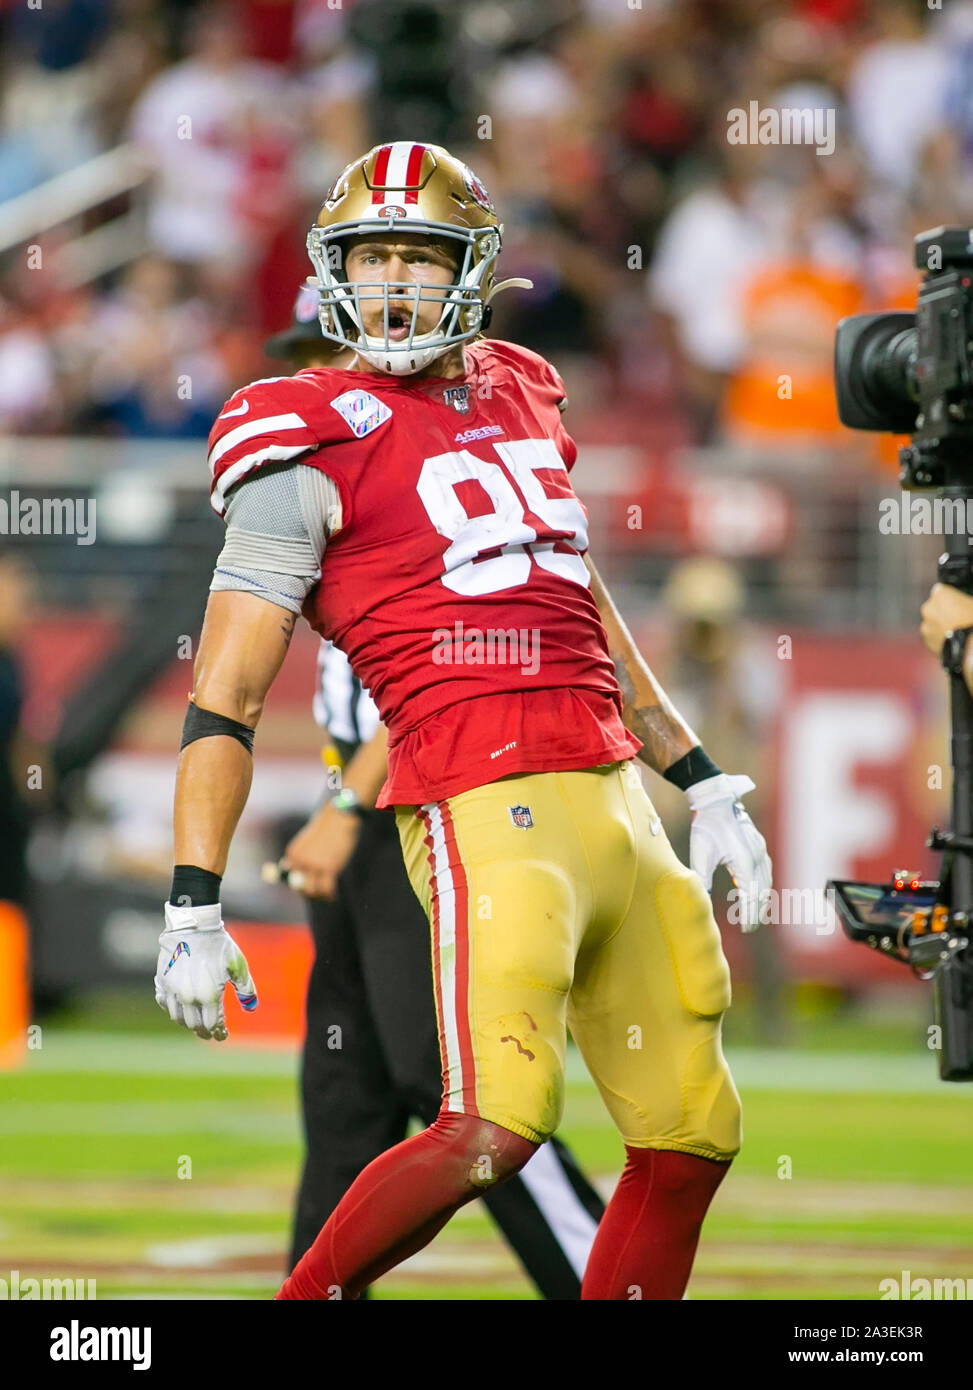 Santa Clara, CA. 7th Oct, 2019. San Francisco 49ers tight end George Kittle  (85) celebrates a touchdown during the NFL football game between the  Cleveland Browns and the San Francisco 49ers at